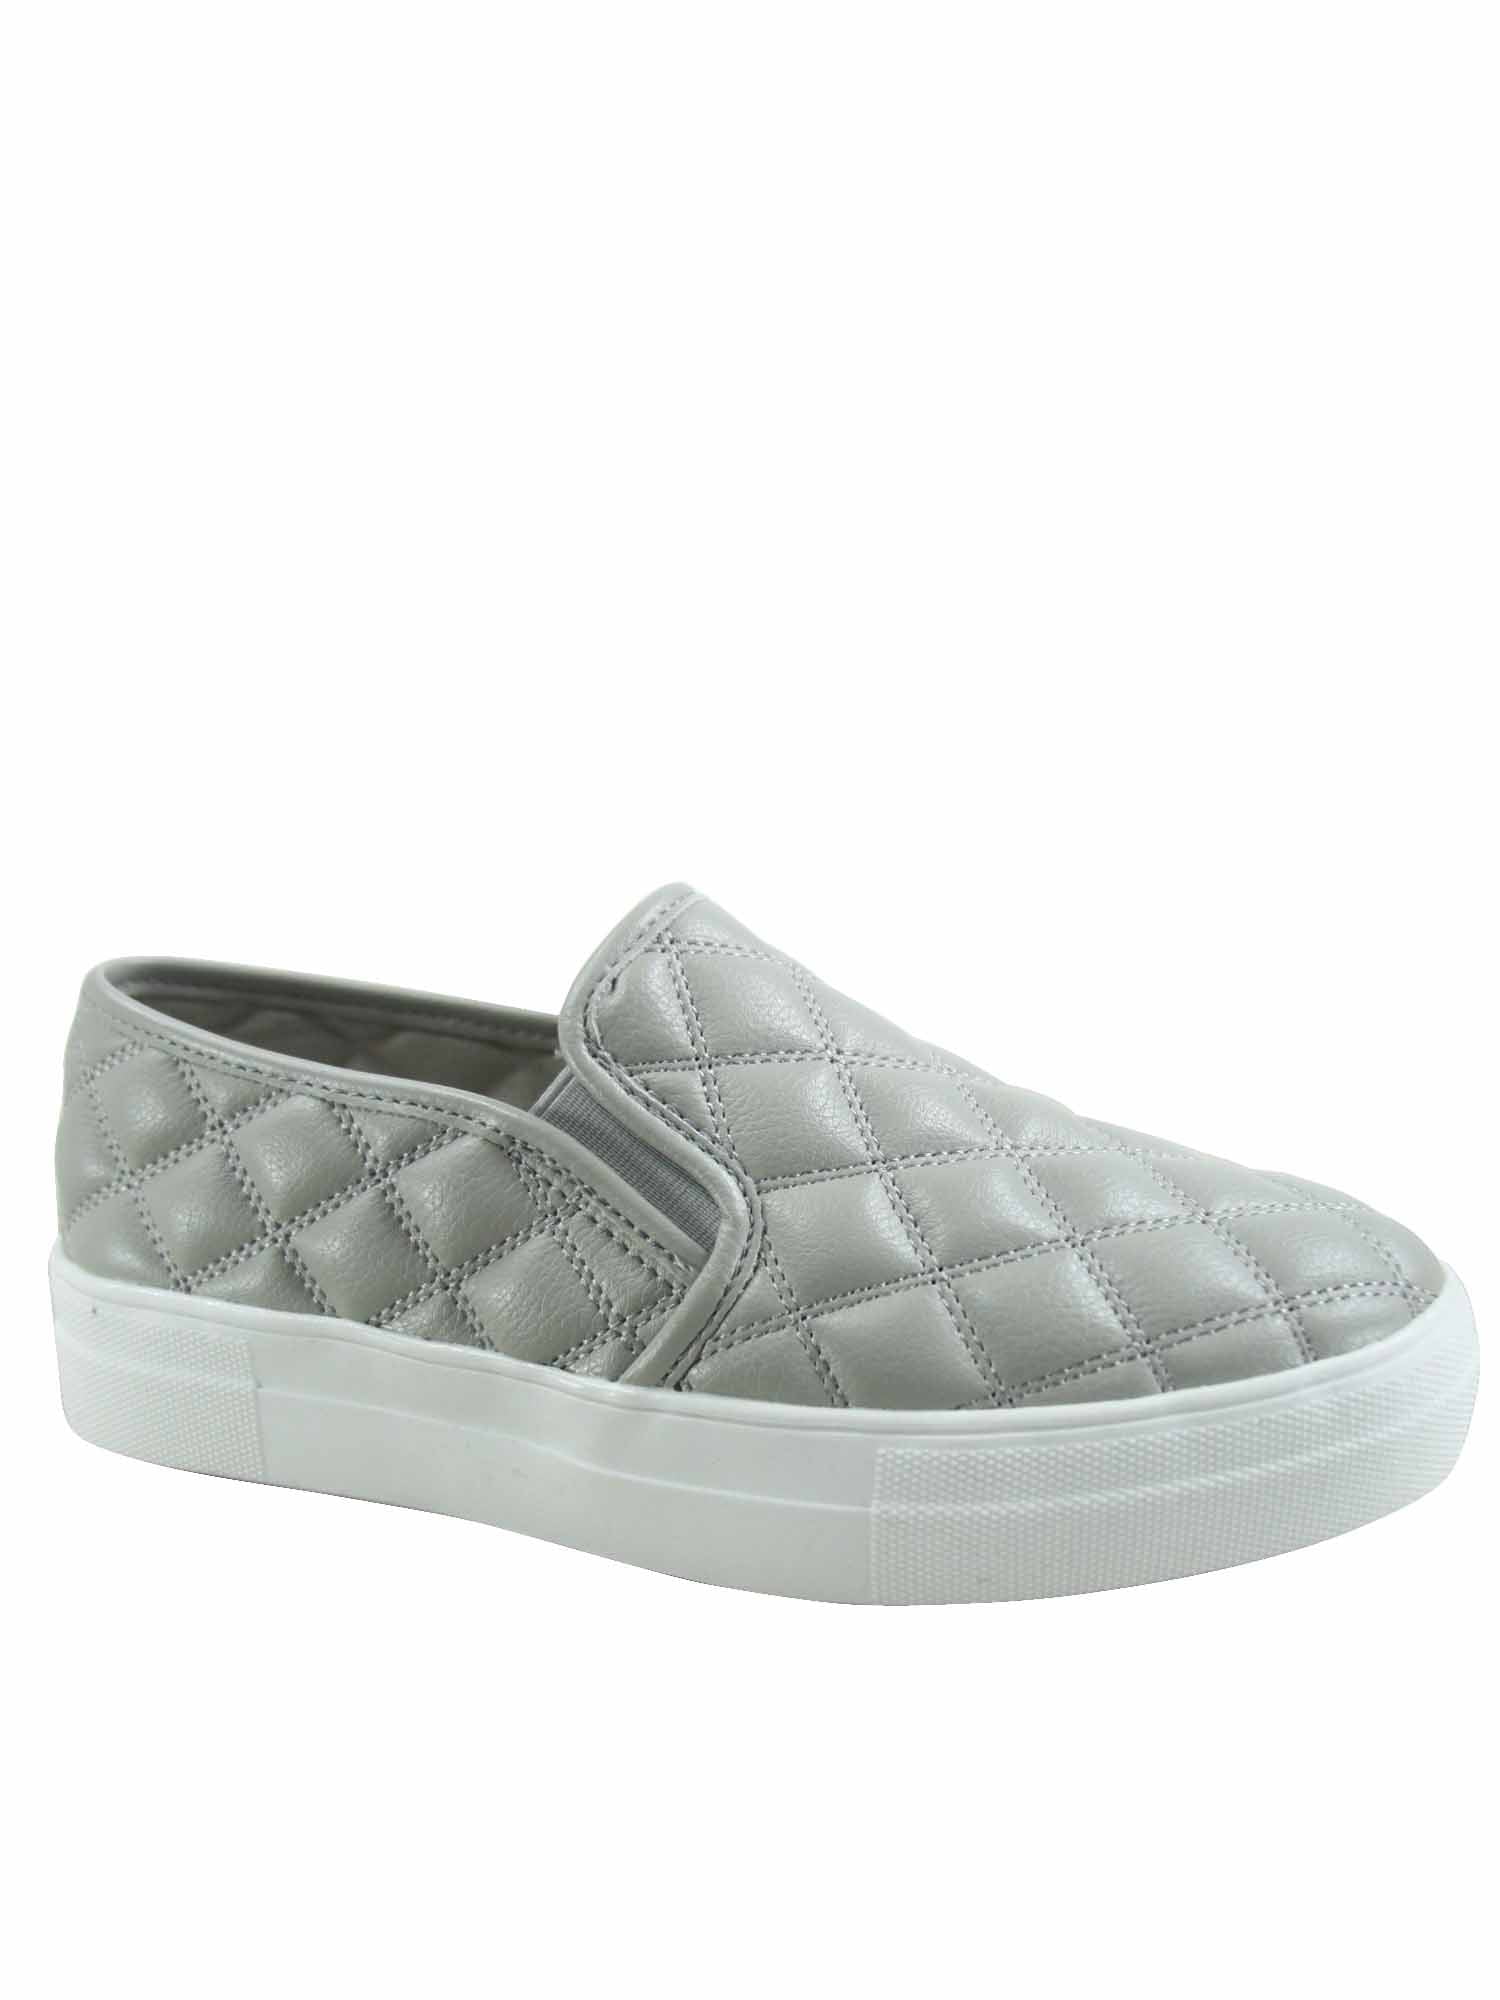 Women's Fashion Sneaker Quilted   Low Top Fashion Sneakers Shoes 